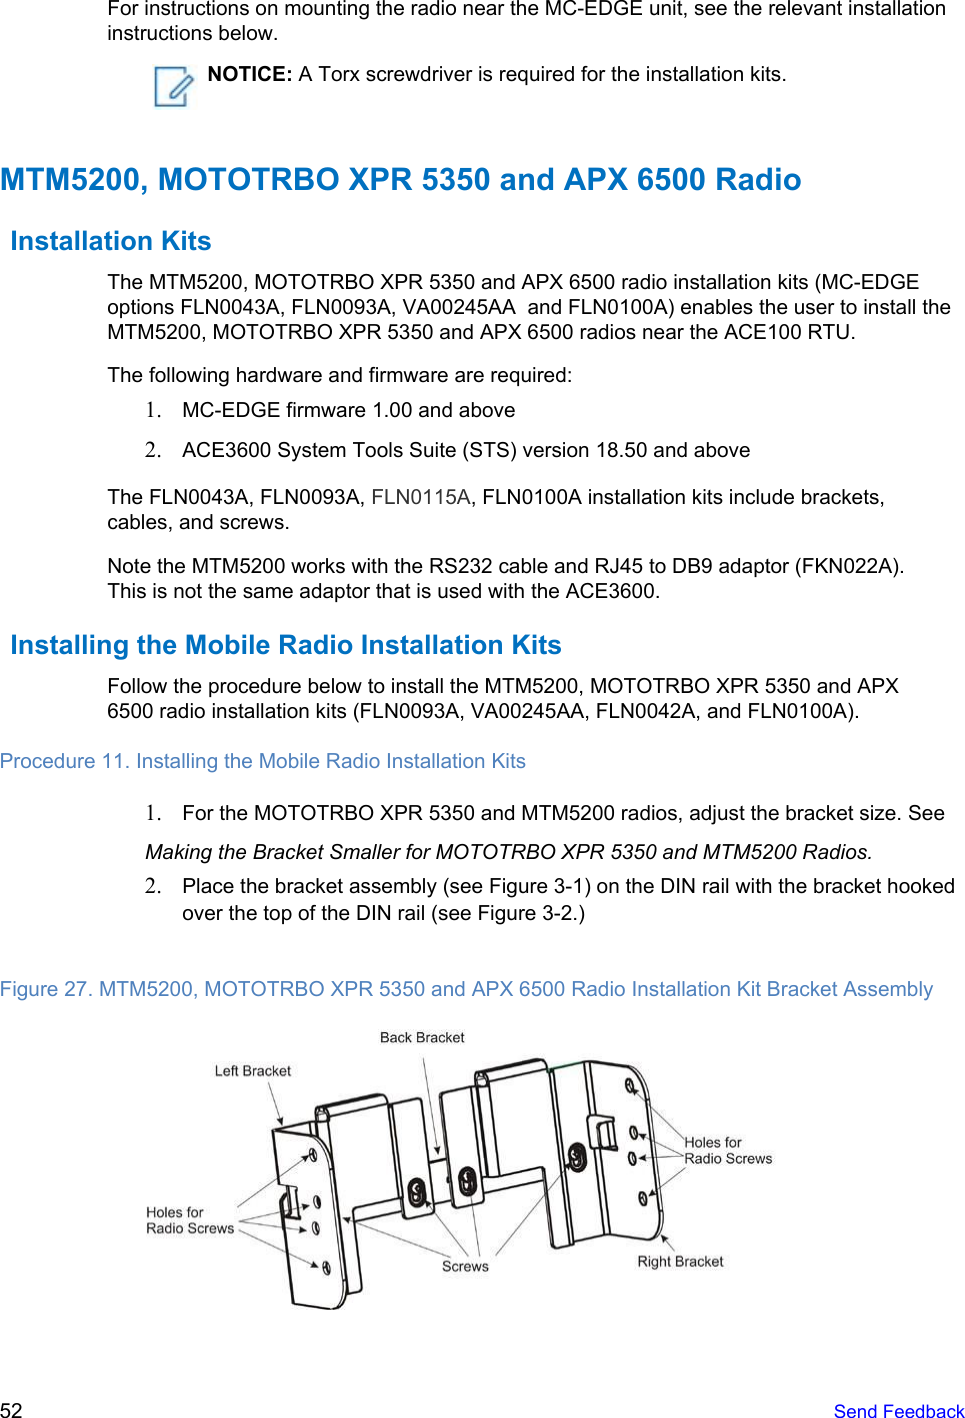   For instructions on mounting the radio near the MC-EDGE unit, see the relevant installation instructions below.  NOTICE: A Torx screwdriver is required for the installation kits. MTM5200, MOTOTRBO XPR 5350 and APX 6500 Radio Installation Kits The MTM5200, MOTOTRBO XPR 5350 and APX 6500 radio installation kits (MC-EDGE options FLN0043A, FLN0093A, VA00245AA  and FLN0100A) enables the user to install the MTM5200, MOTOTRBO XPR 5350 and APX 6500 radios near the ACE100 RTU. The following hardware and firmware are required: 1. MC-EDGE firmware 1.00 and above 2. ACE3600 System Tools Suite (STS) version 18.50 and above The FLN0043A, FLN0093A, FLN0115A, FLN0100A installation kits include brackets, cables, and screws. Note the MTM5200 works with the RS232 cable and RJ45 to DB9 adaptor (FKN022A). This is not the same adaptor that is used with the ACE3600. Installing the Mobile Radio Installation Kits Follow the procedure below to install the MTM5200, MOTOTRBO XPR 5350 and APX 6500 radio installation kits (FLN0093A, VA00245AA, FLN0042A, and FLN0100A). Procedure 11. Installing the Mobile Radio Installation Kits 1. For the MOTOTRBO XPR 5350 and MTM5200 radios, adjust the bracket size. See Making the Bracket Smaller for MOTOTRBO XPR 5350 and MTM5200 Radios. 2. Place the bracket assembly (see Figure 3-1) on the DIN rail with the bracket hooked over the top of the DIN rail (see Figure 3-2.)  Figure 27. MTM5200, MOTOTRBO XPR 5350 and APX 6500 Radio Installation Kit Bracket Assembly   52   Send Feedback  